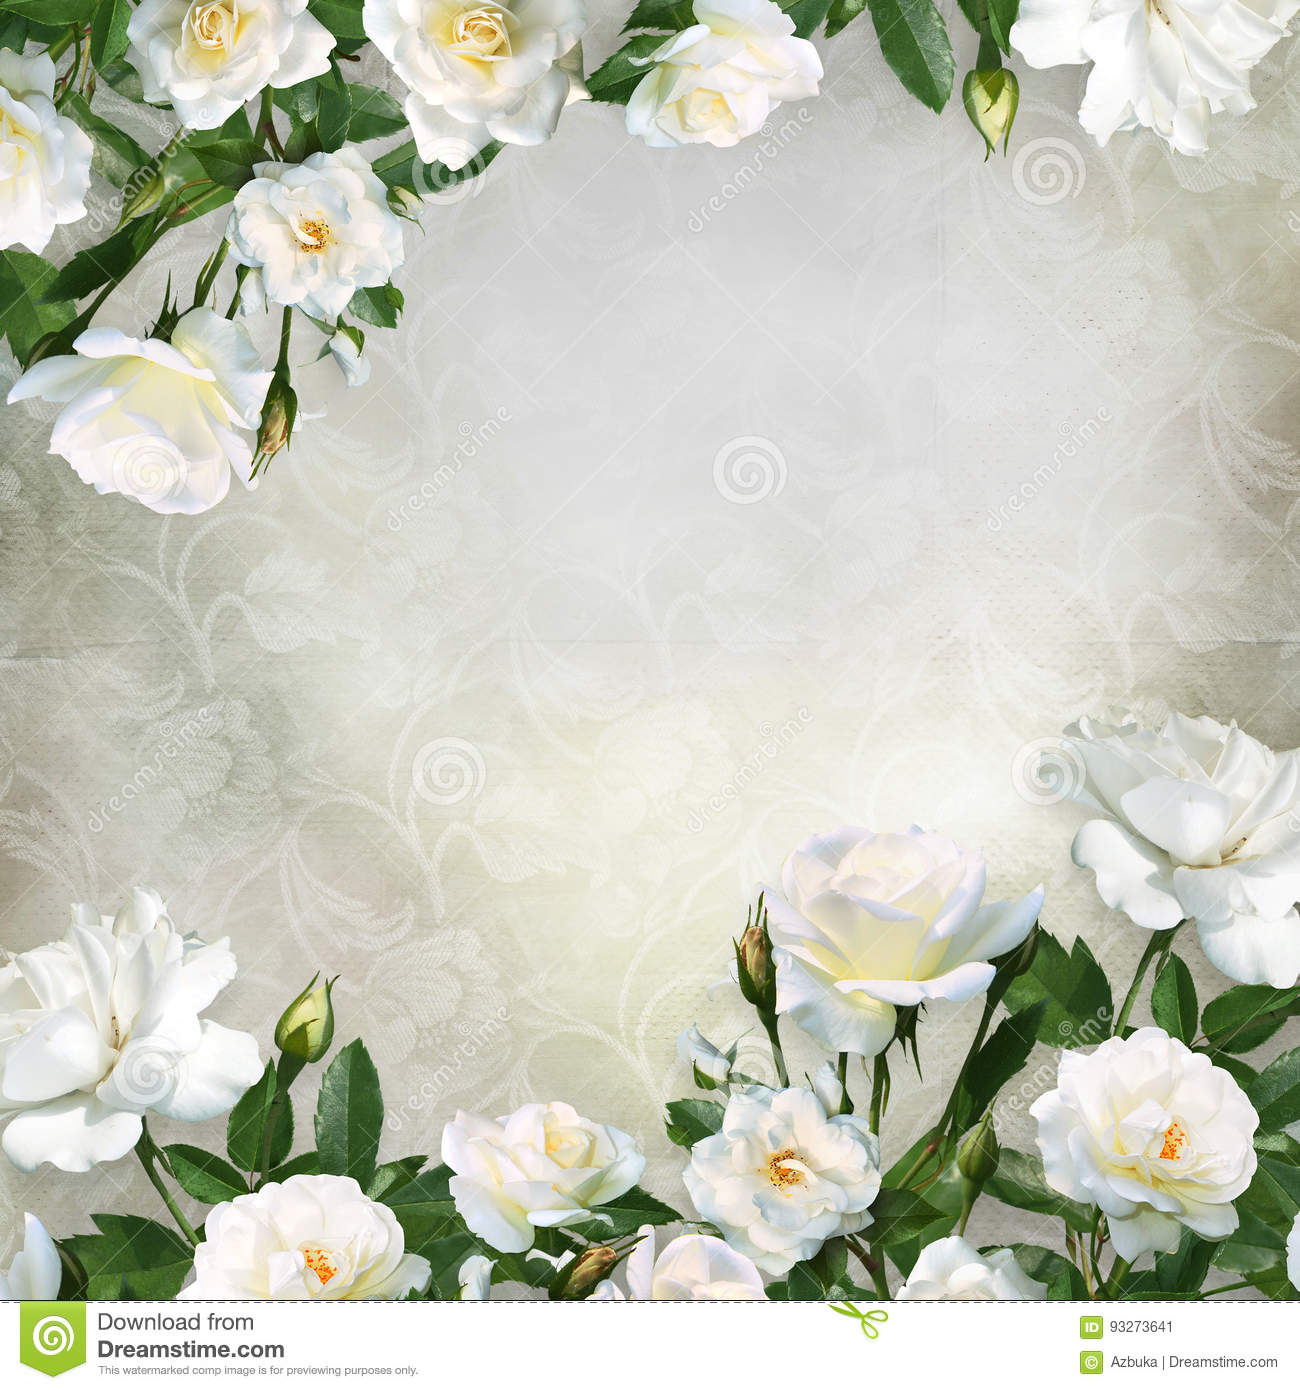 Border of white roses on a beautiful vintage background with space for text or photo stock illustration